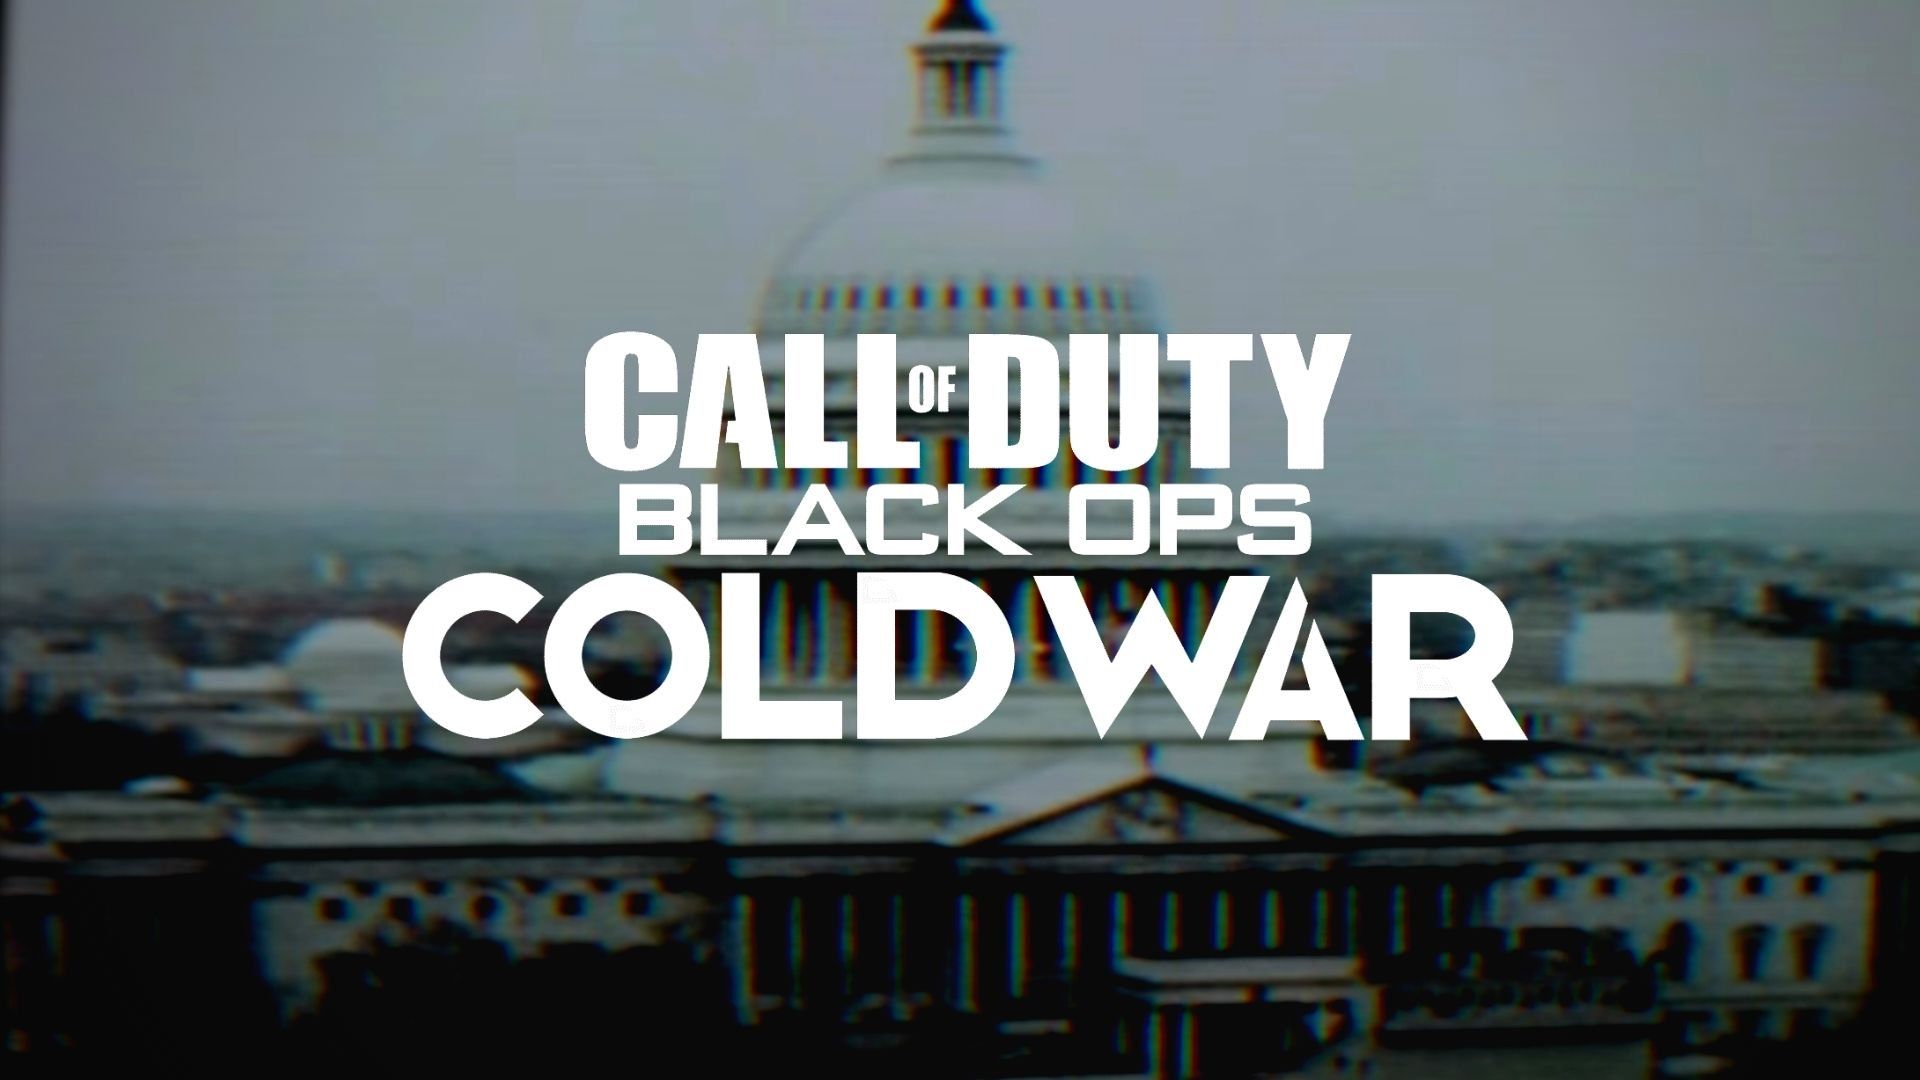 Call of Duty Black Ops Cold War teaser trailer confirms reveal date